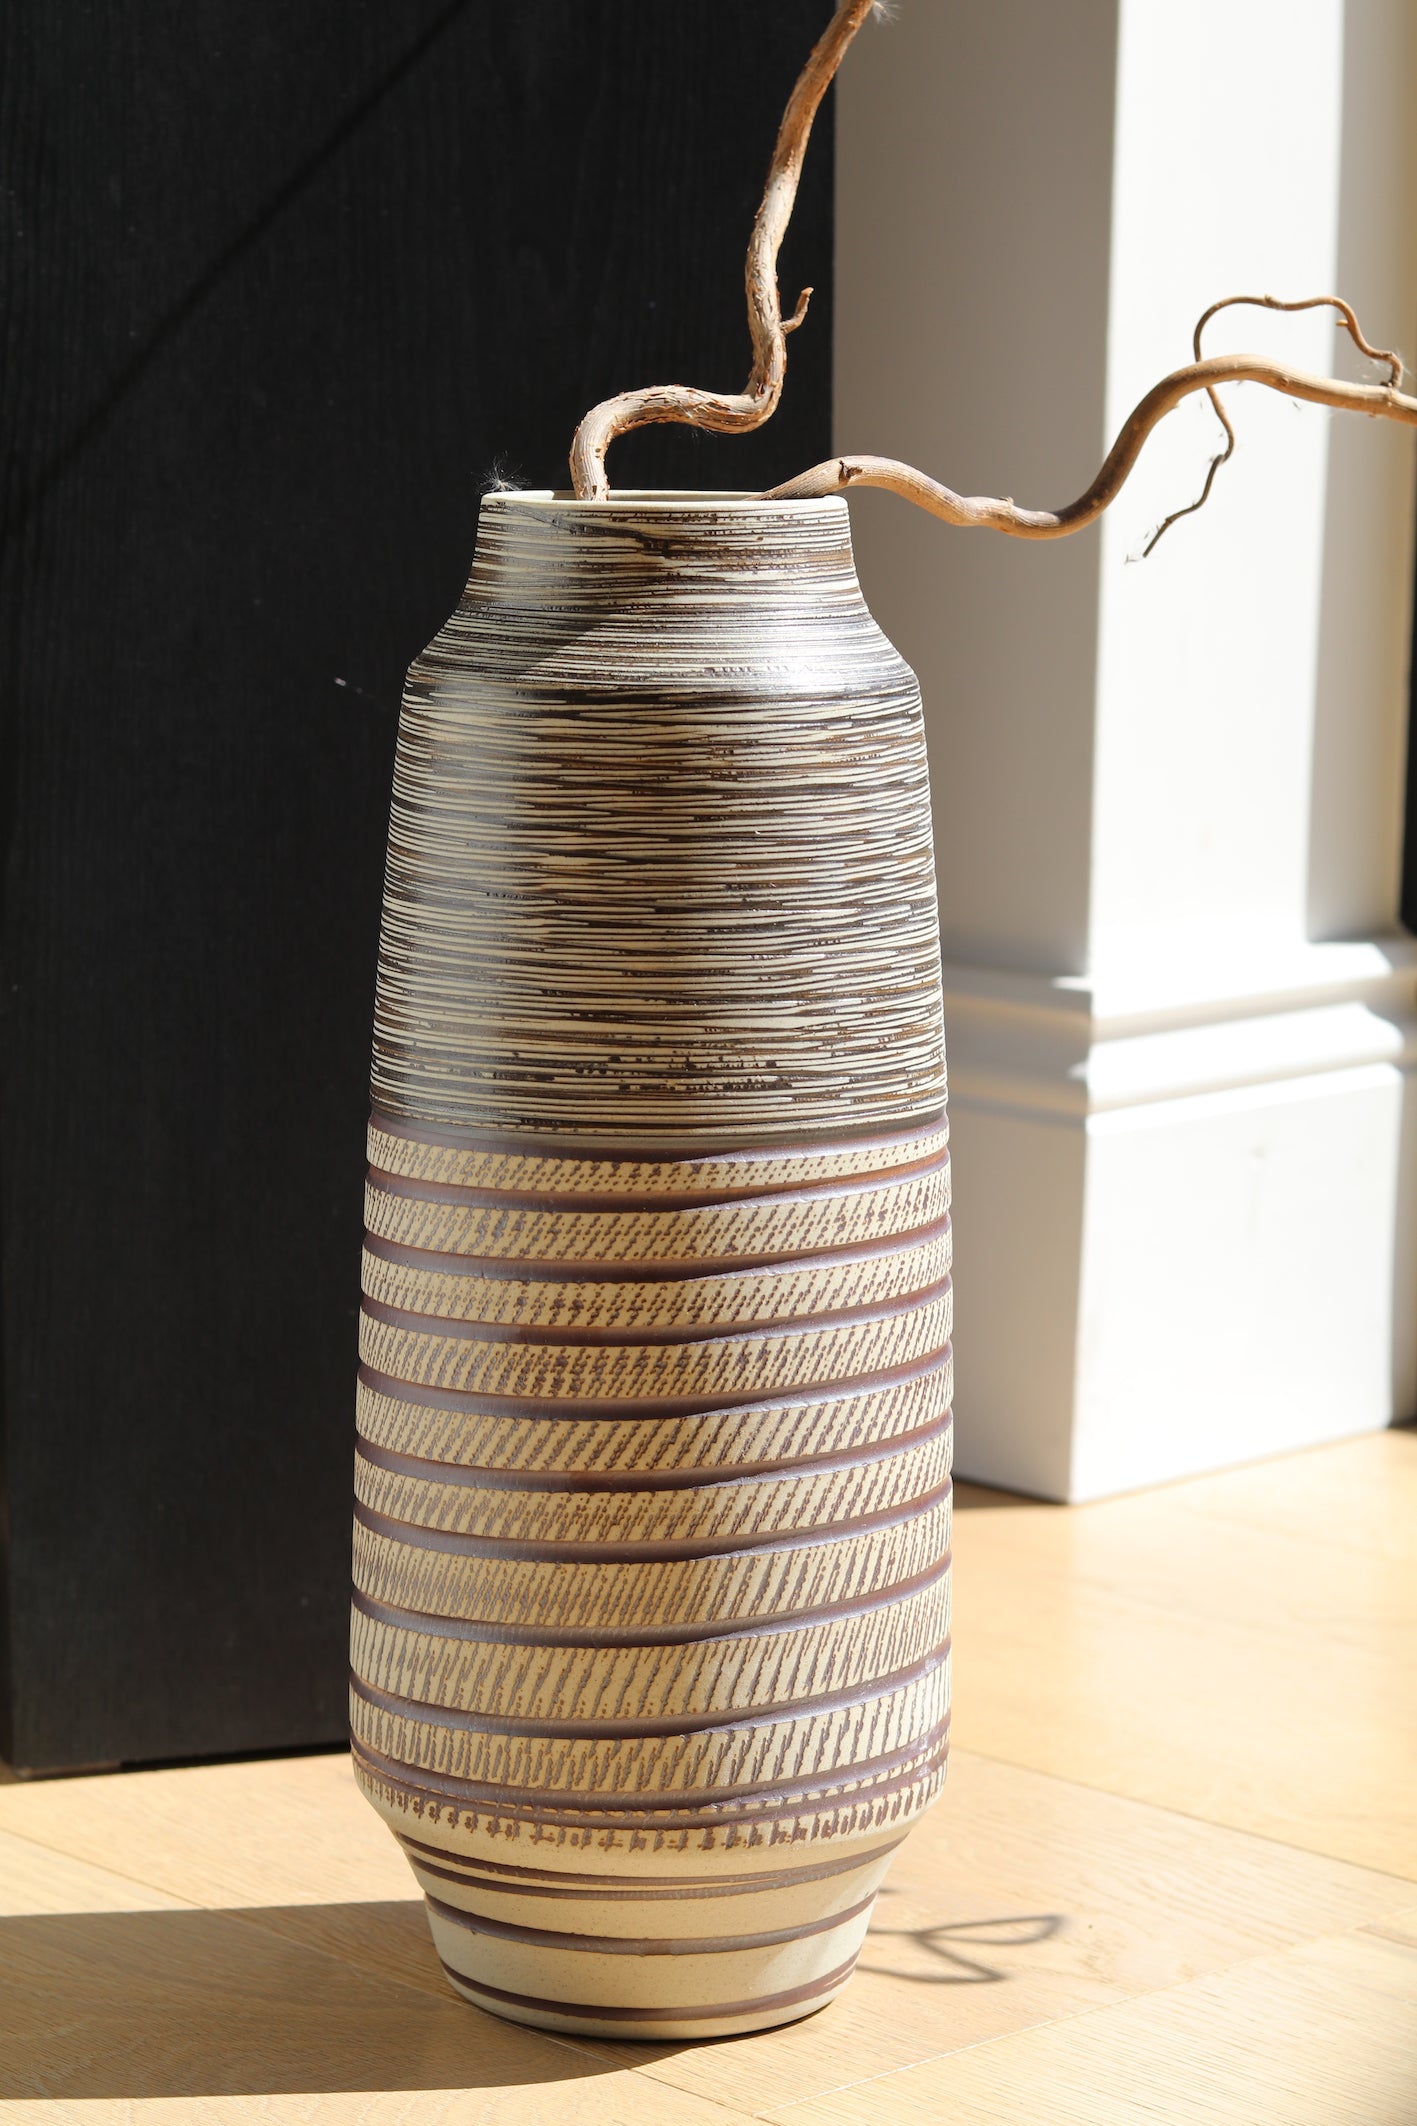 Textured Ceramic Vase (3 sizes to choose from)